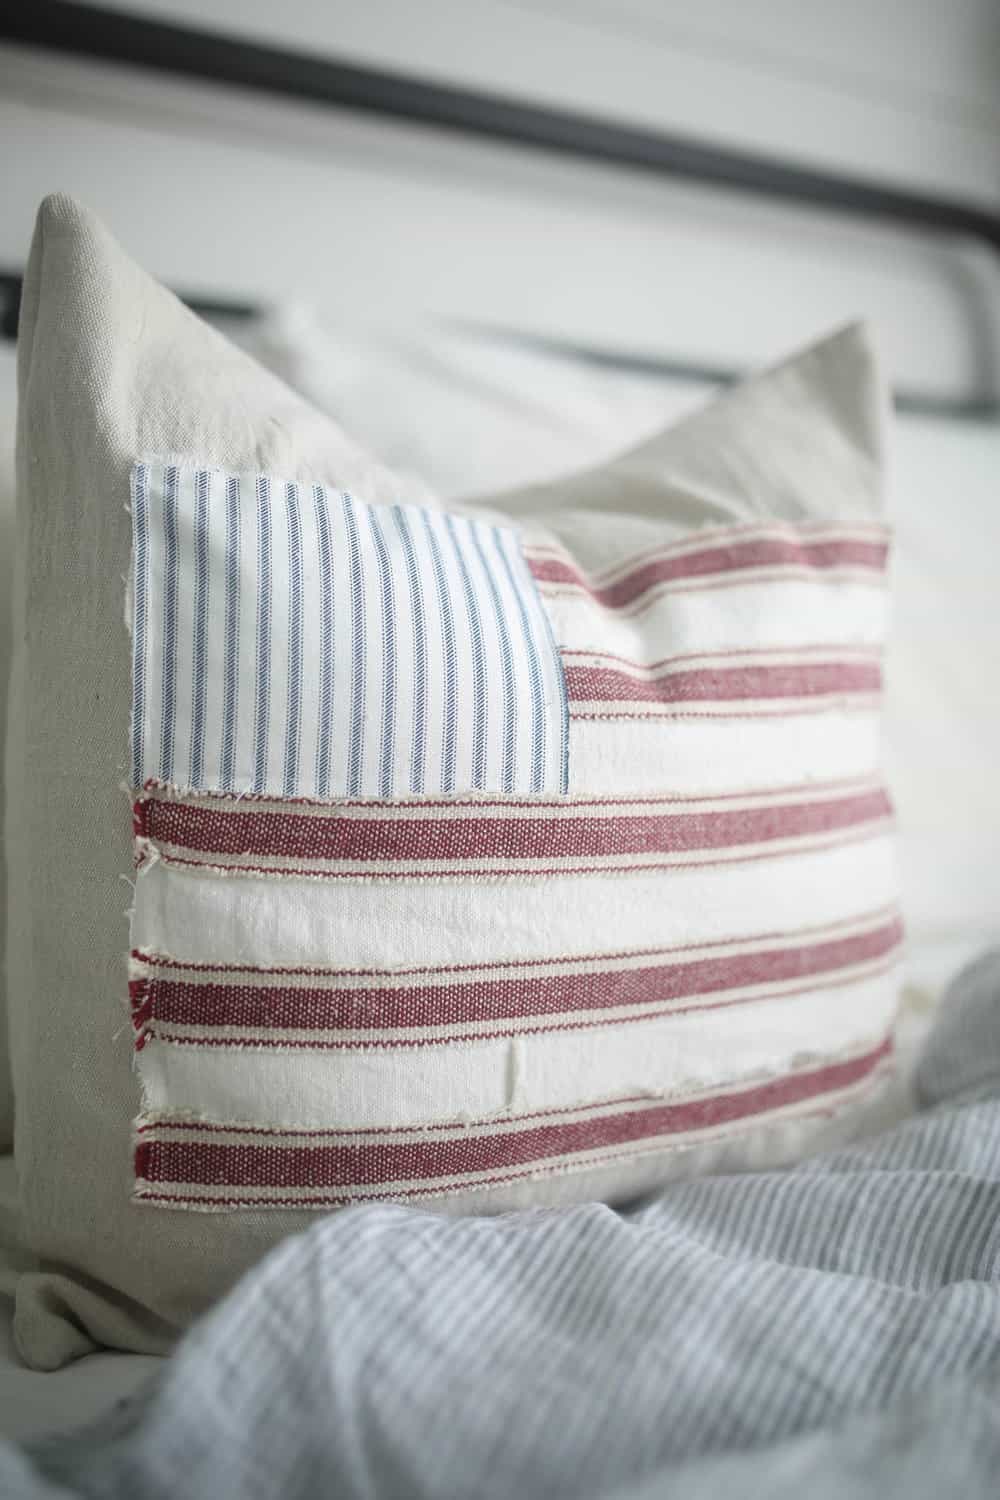 DIY 4th of July Scrappy Flag Pillow Cover - Best DIY 4th of July Decorations - The NavagePatch.com